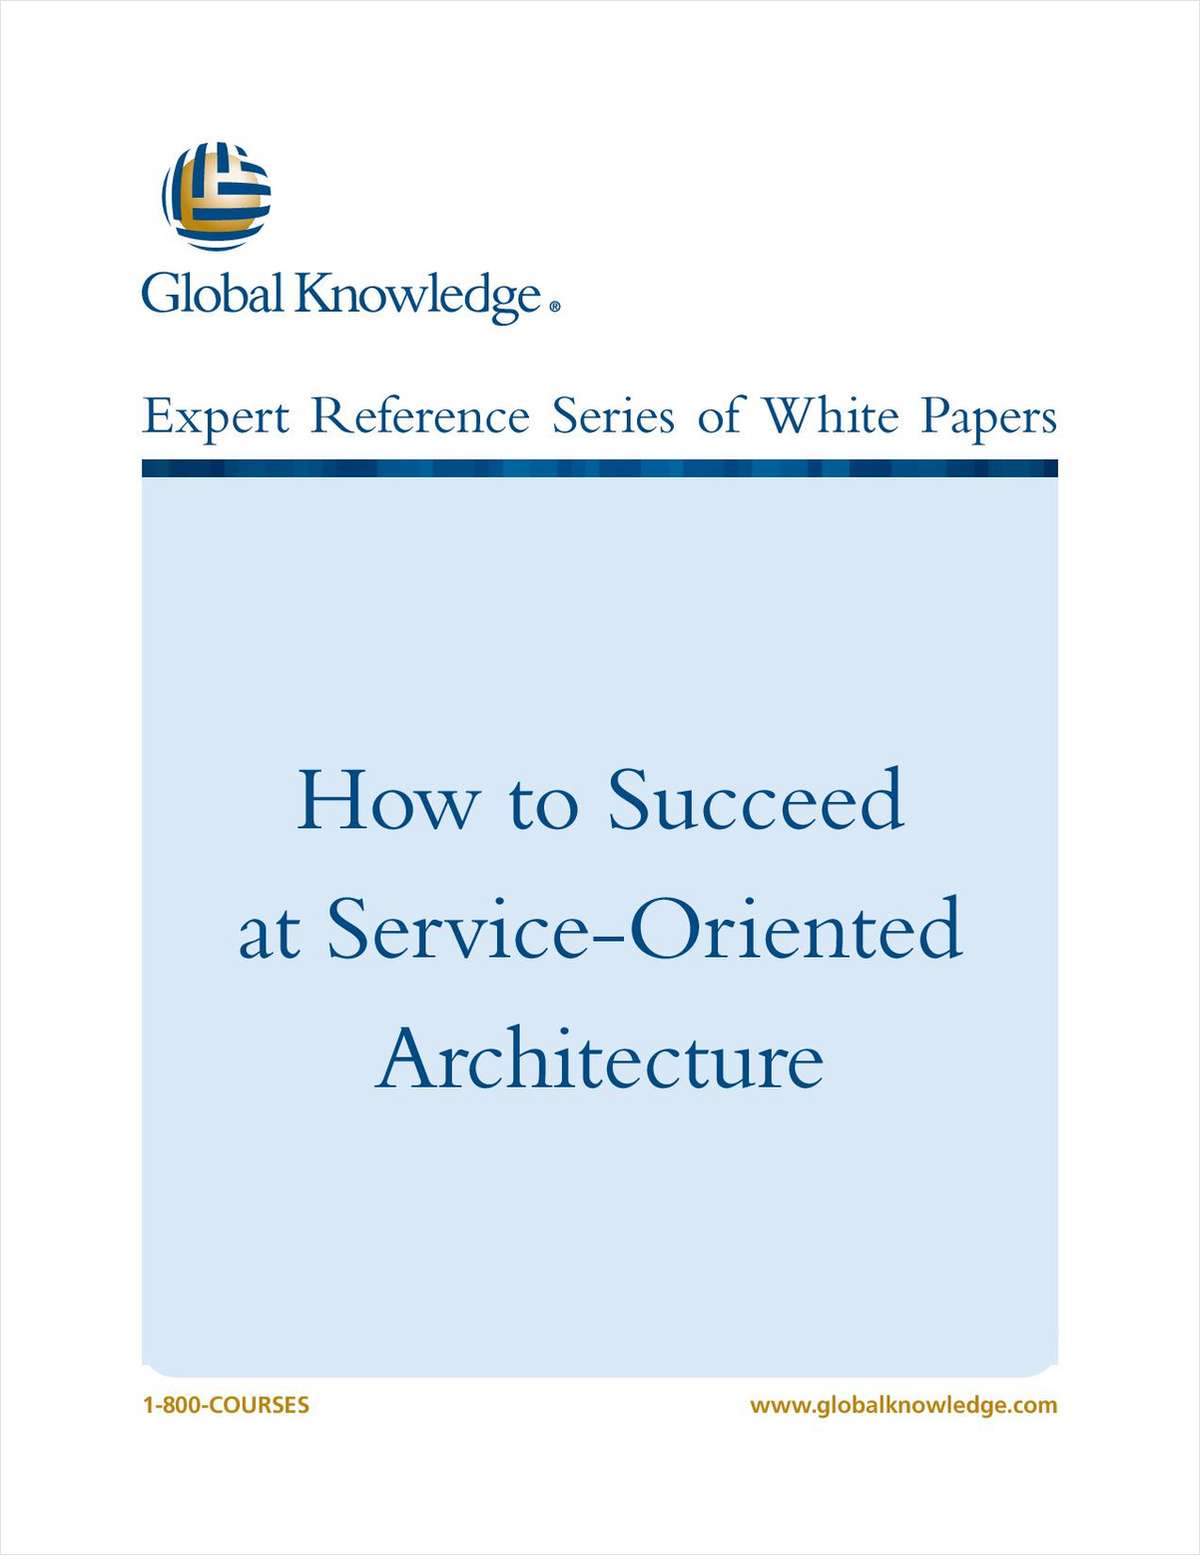 How to Succeed at Service-Oriented Architecture